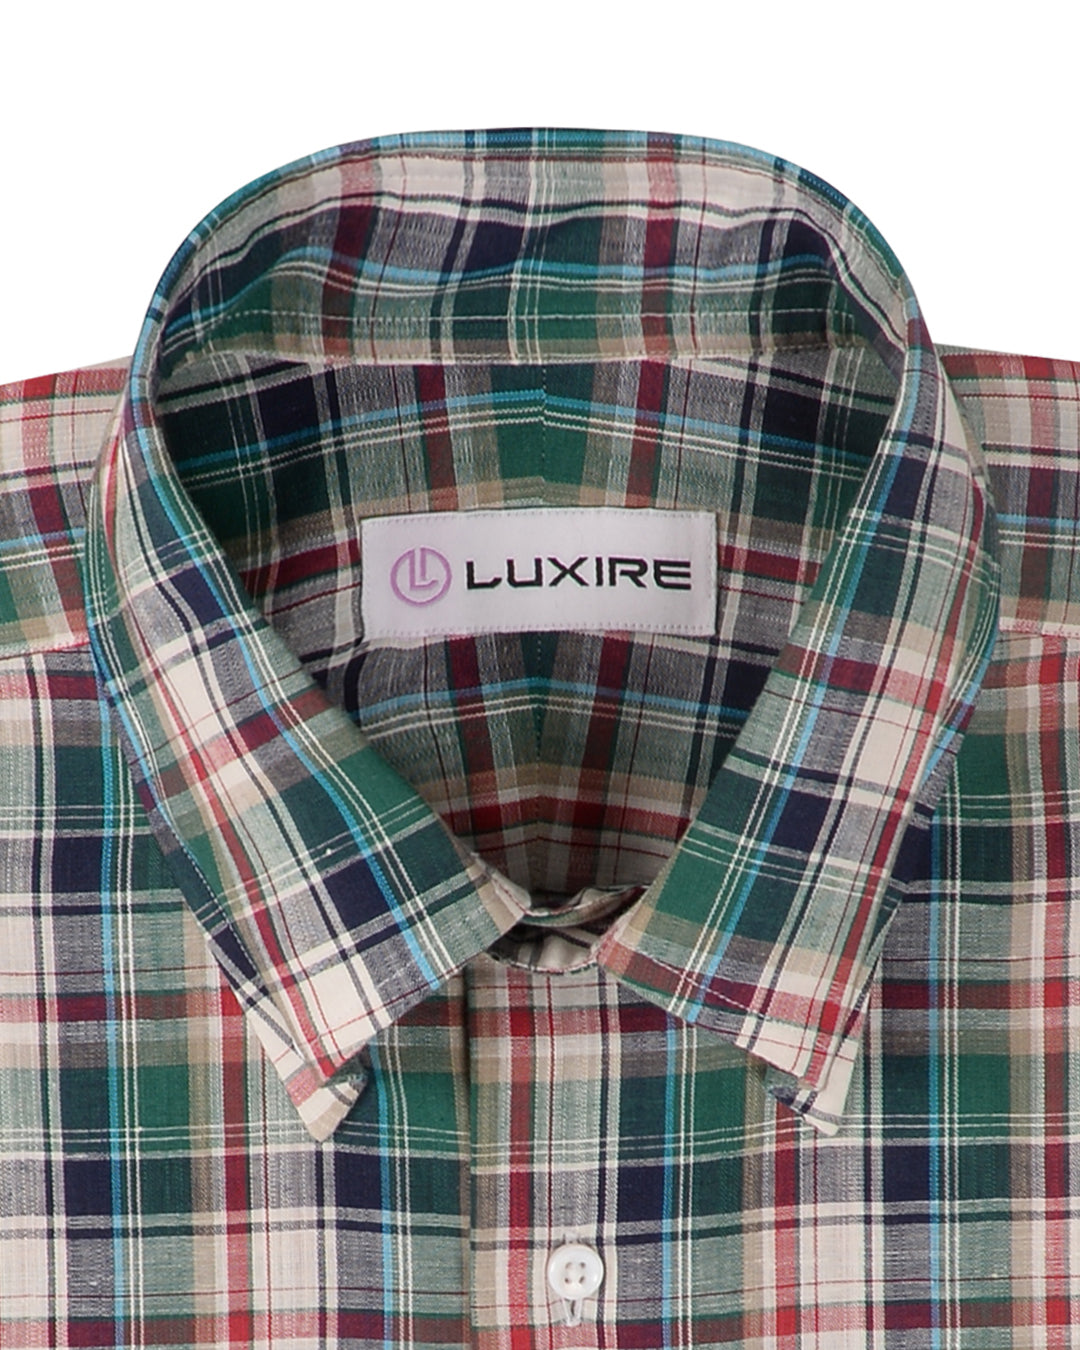 Collar of custom linen shirt for men in red green navy and white by Luxire Clothing